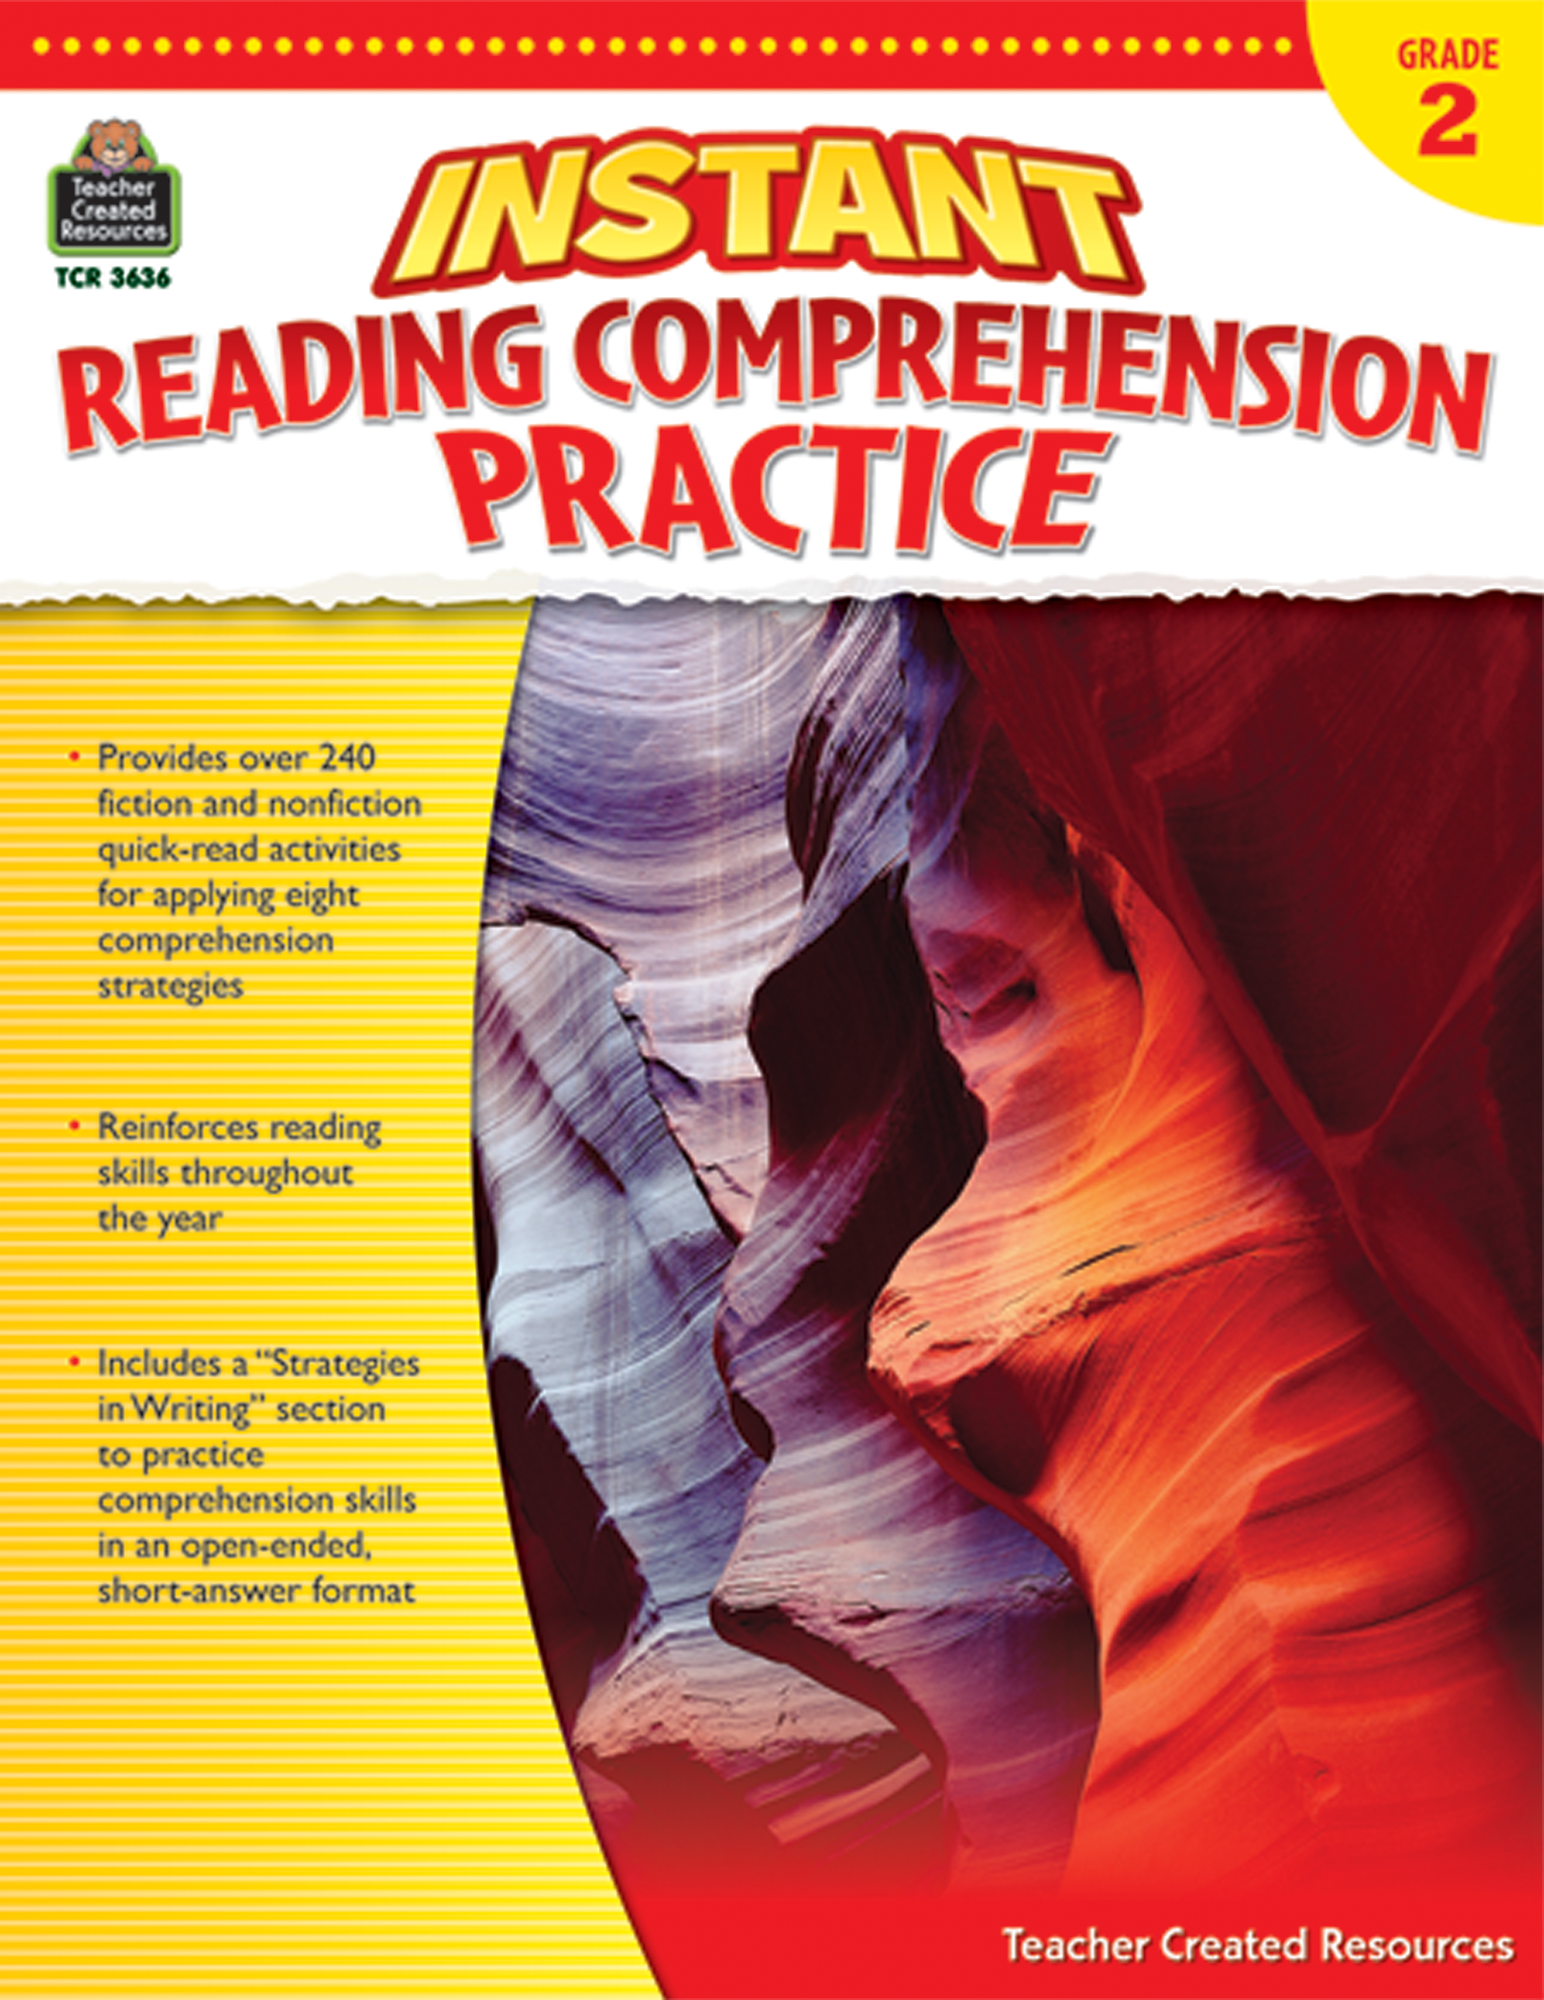 instant-reading-comprehension-practice-grade-2-tcr3636-teacher-created-resources